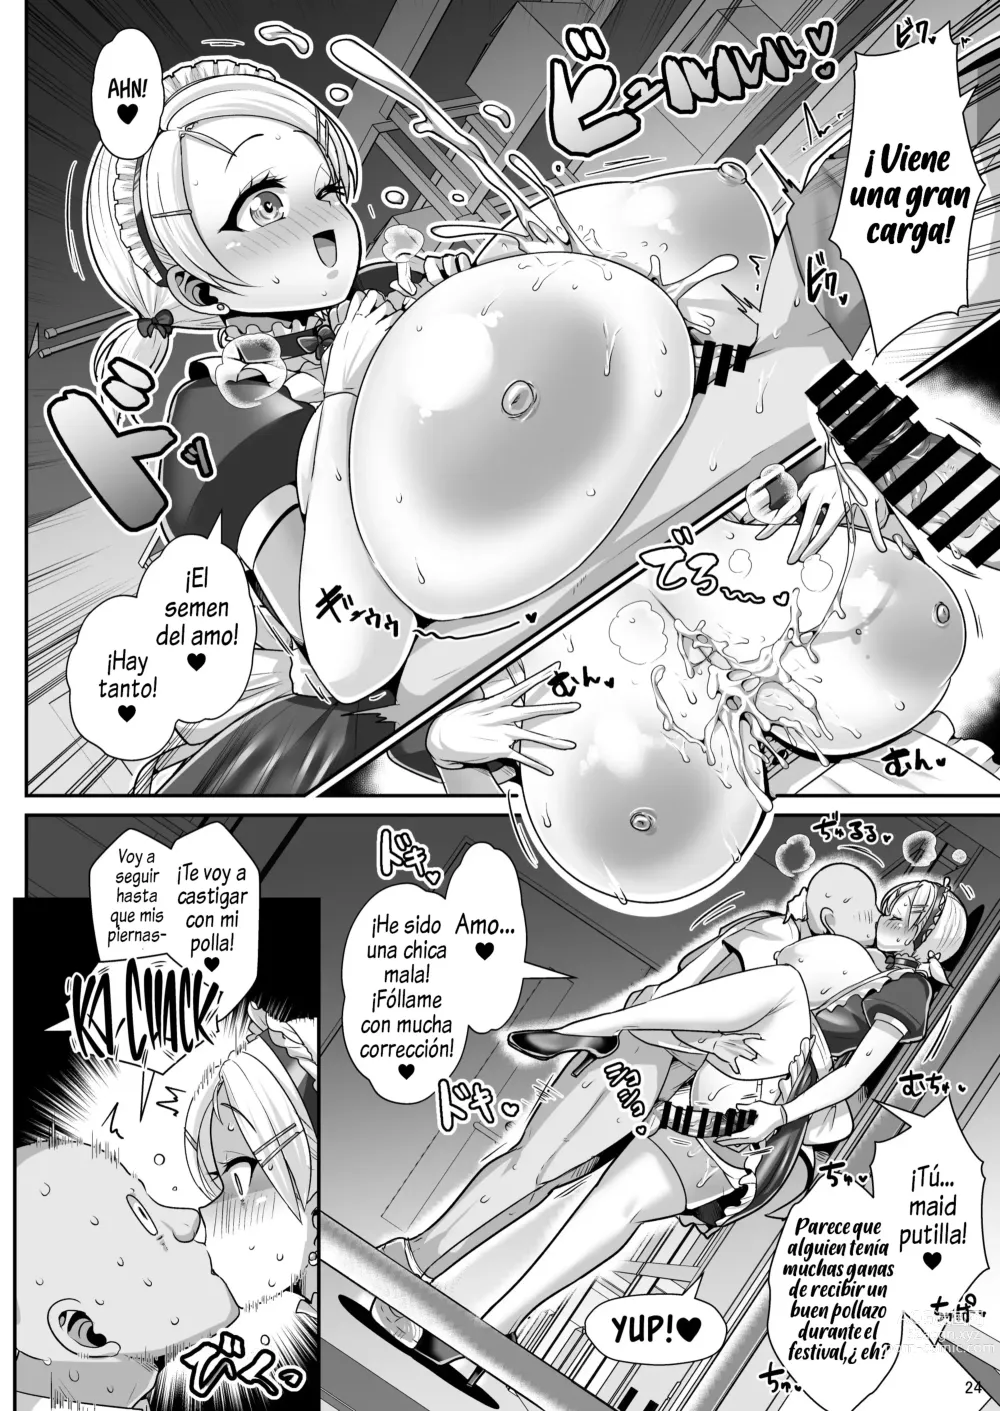 Page 86 of doujinshi A Nymphomaniac Blonde Exchange Student with Gigantic Tits Moved in Next Door!! 1-3